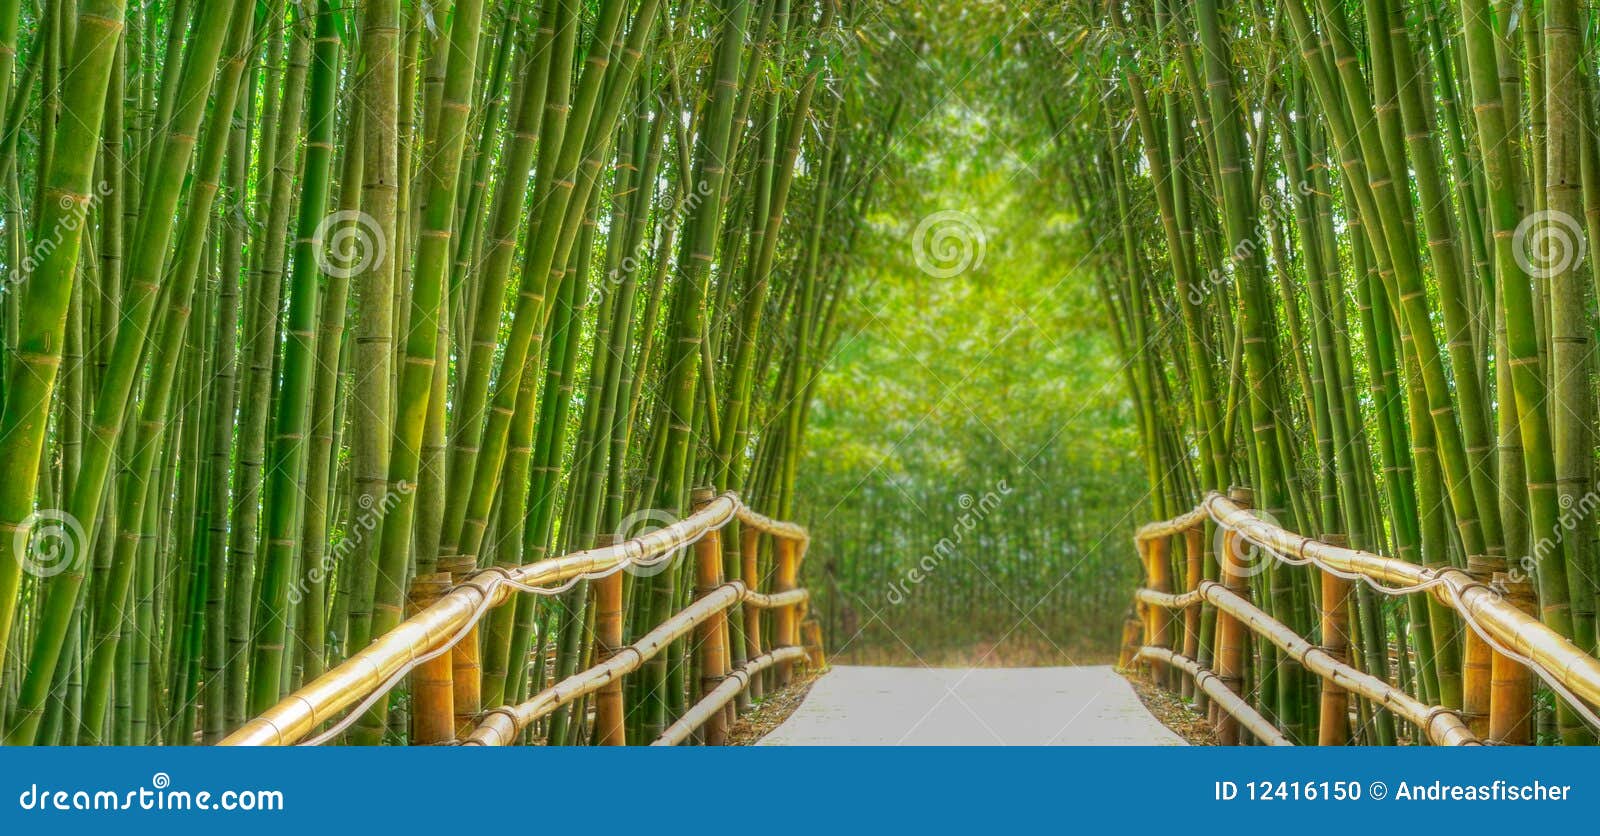 bamboo alley